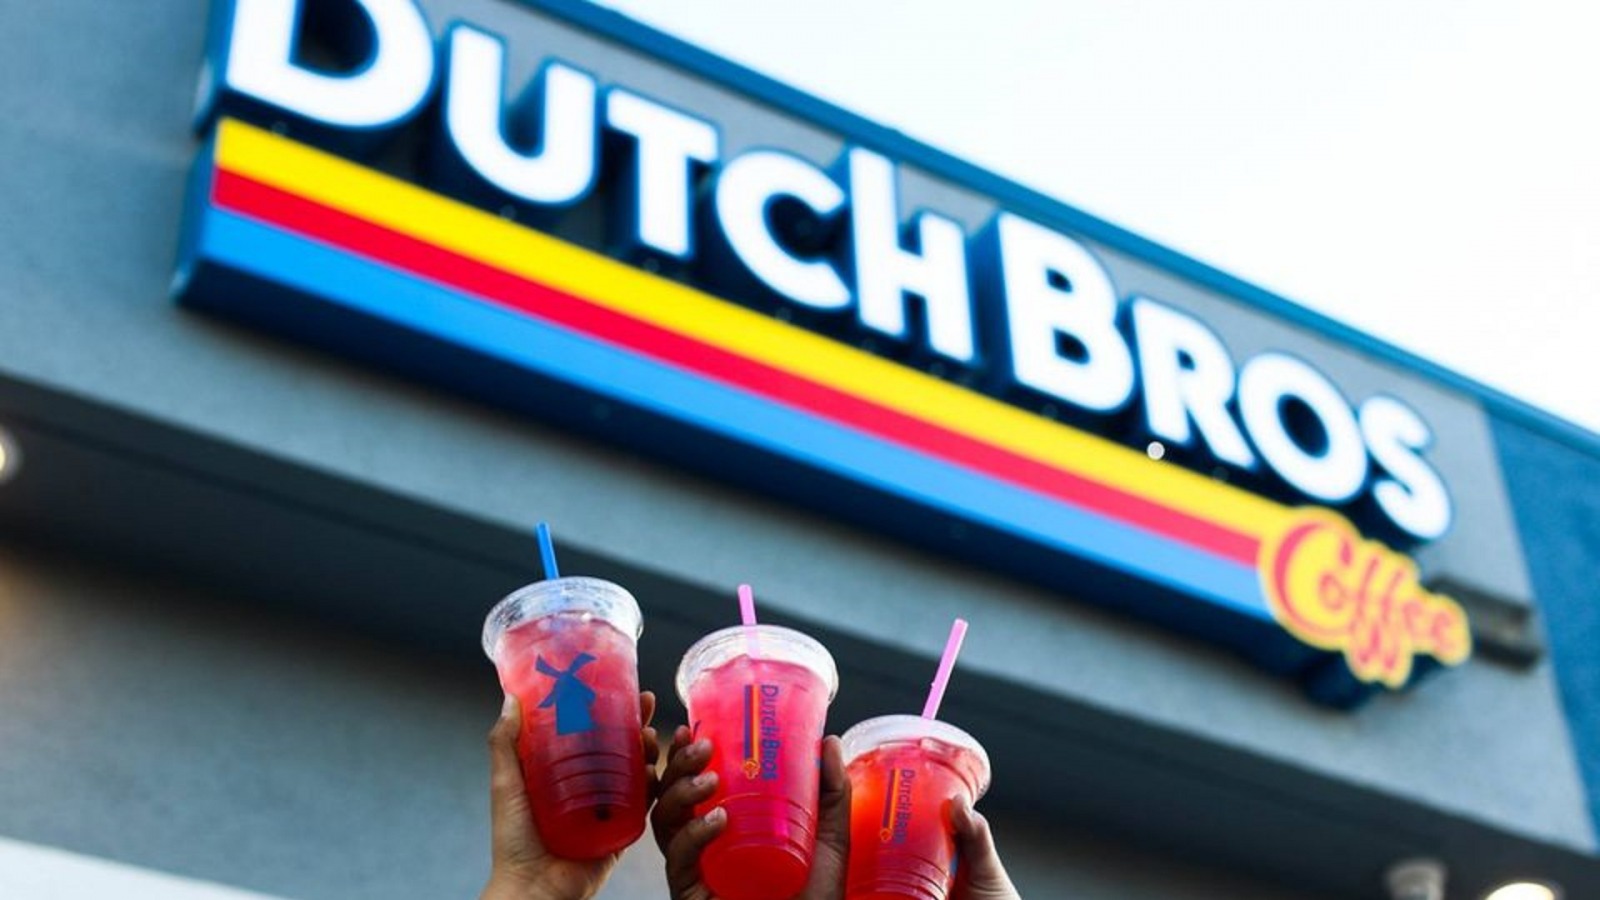 The Untold Truth Of Dutch Bros Coffee